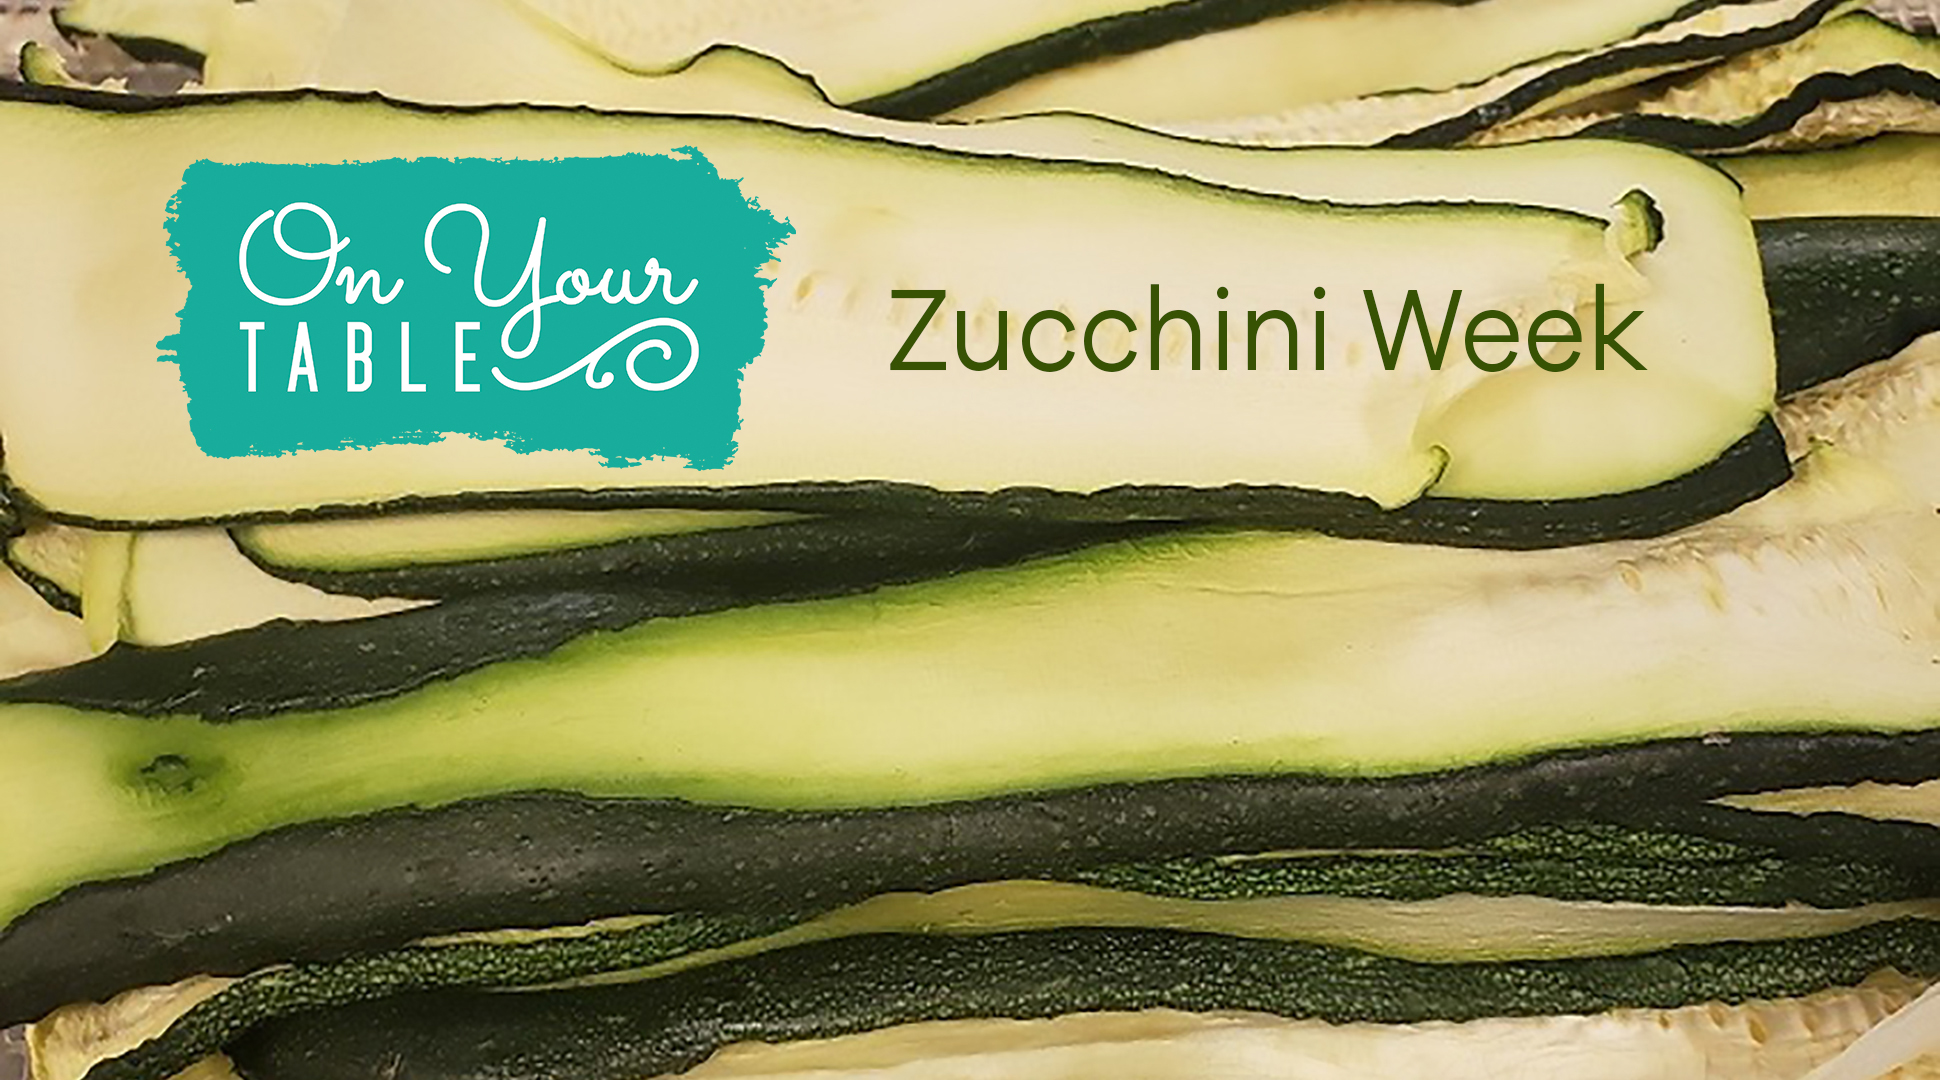 And our top zucchini recipe is...